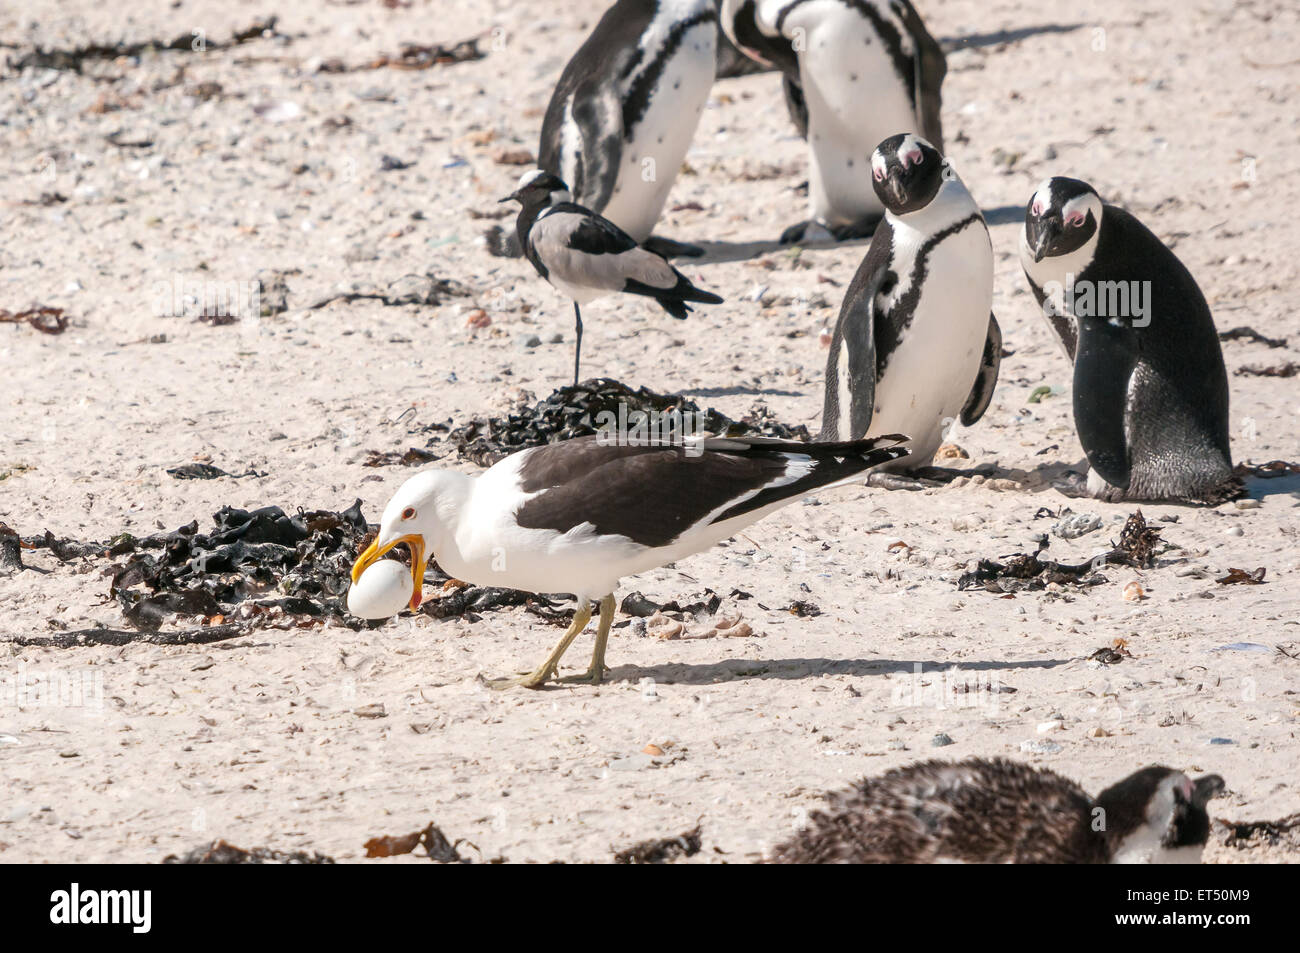 A Gull stealing the egg of an endangered African Penguin at the Boulders section of the Table Mountain National Park in Simons T Stock Photo